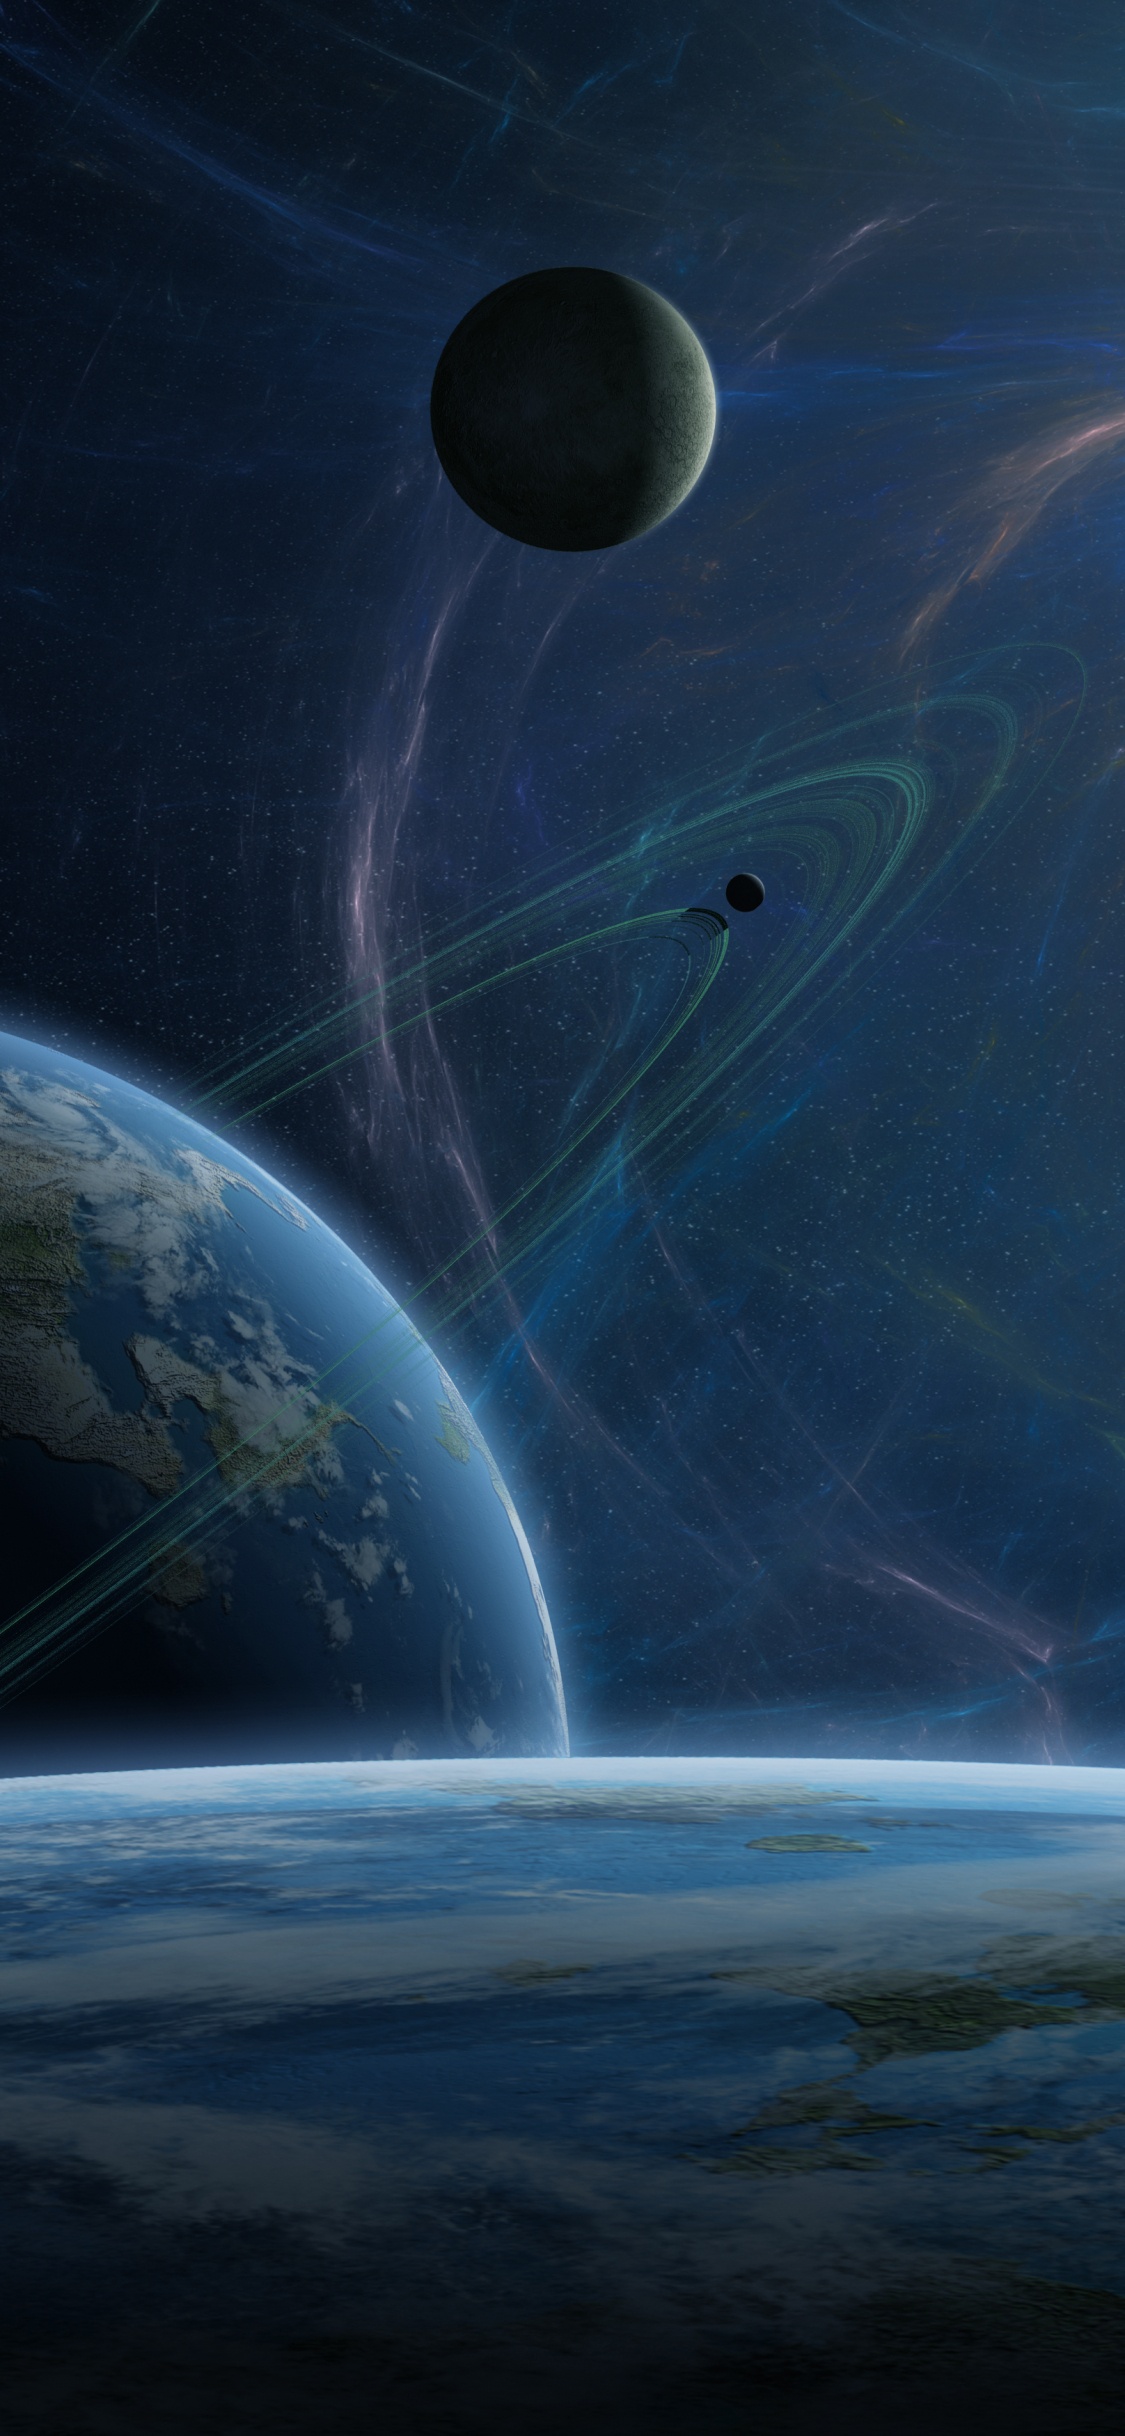 Blue and White Planet Illustration. Wallpaper in 1125x2436 Resolution